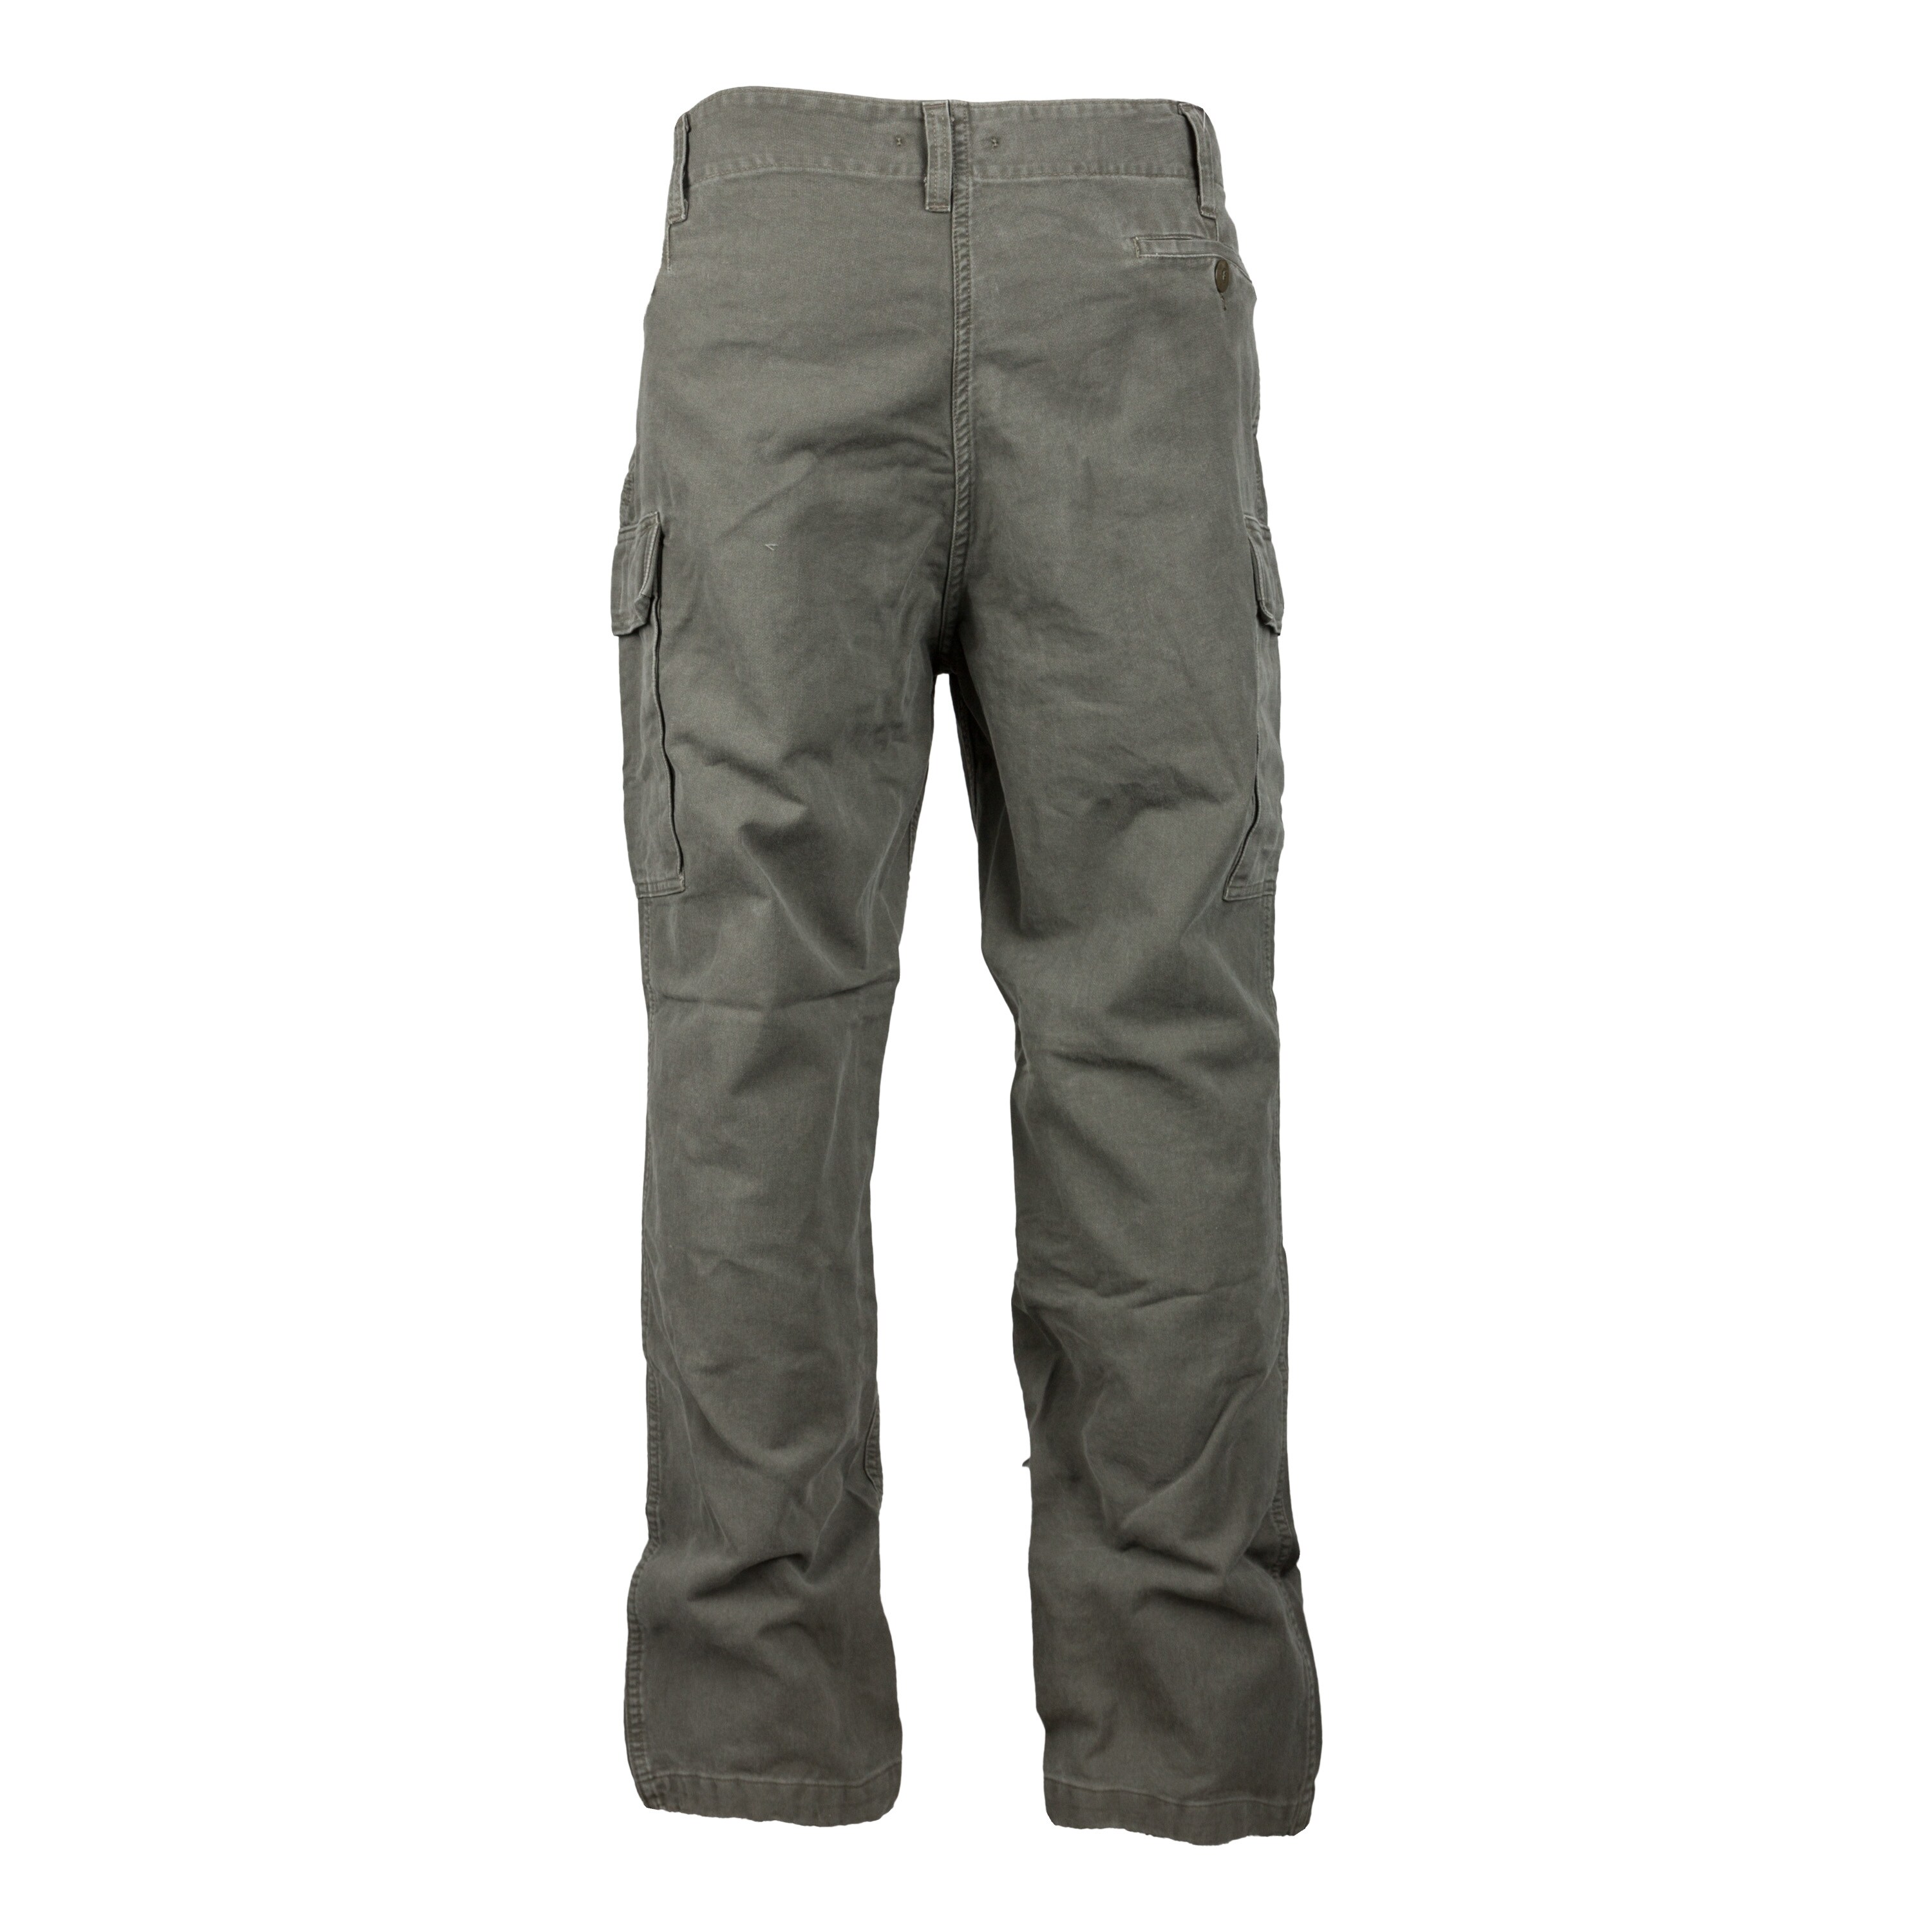 Purchase the Moleskin Pants Prewashed olive by ASMC